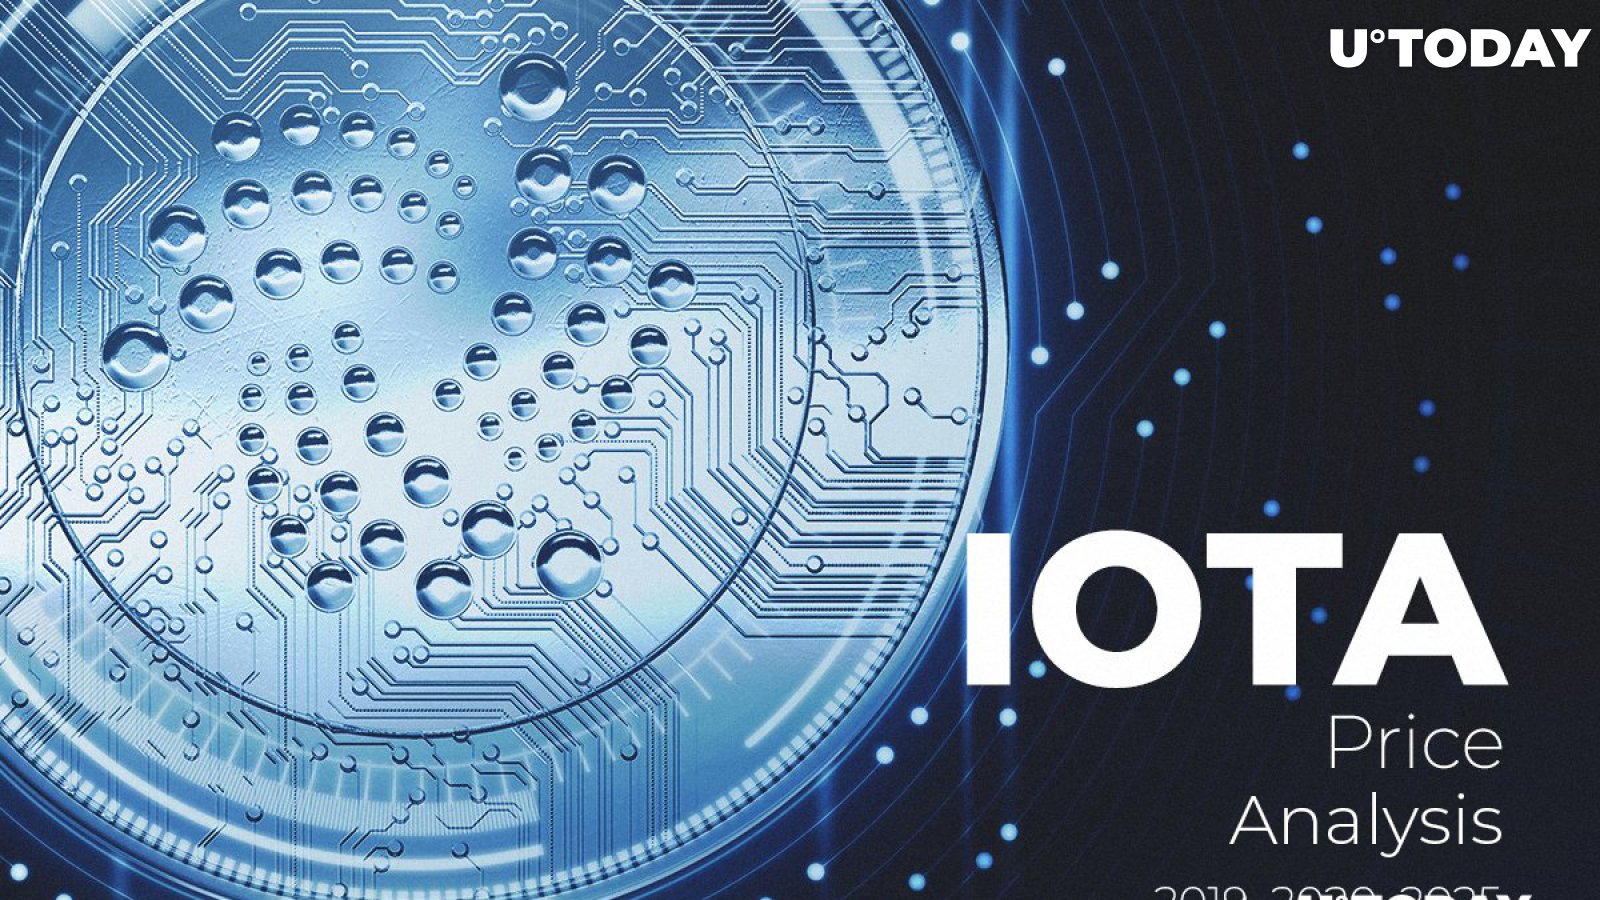 IOTA Price Analysis 2019, 2020, 2025 — How Much Might the Cost of MIOTA Be?